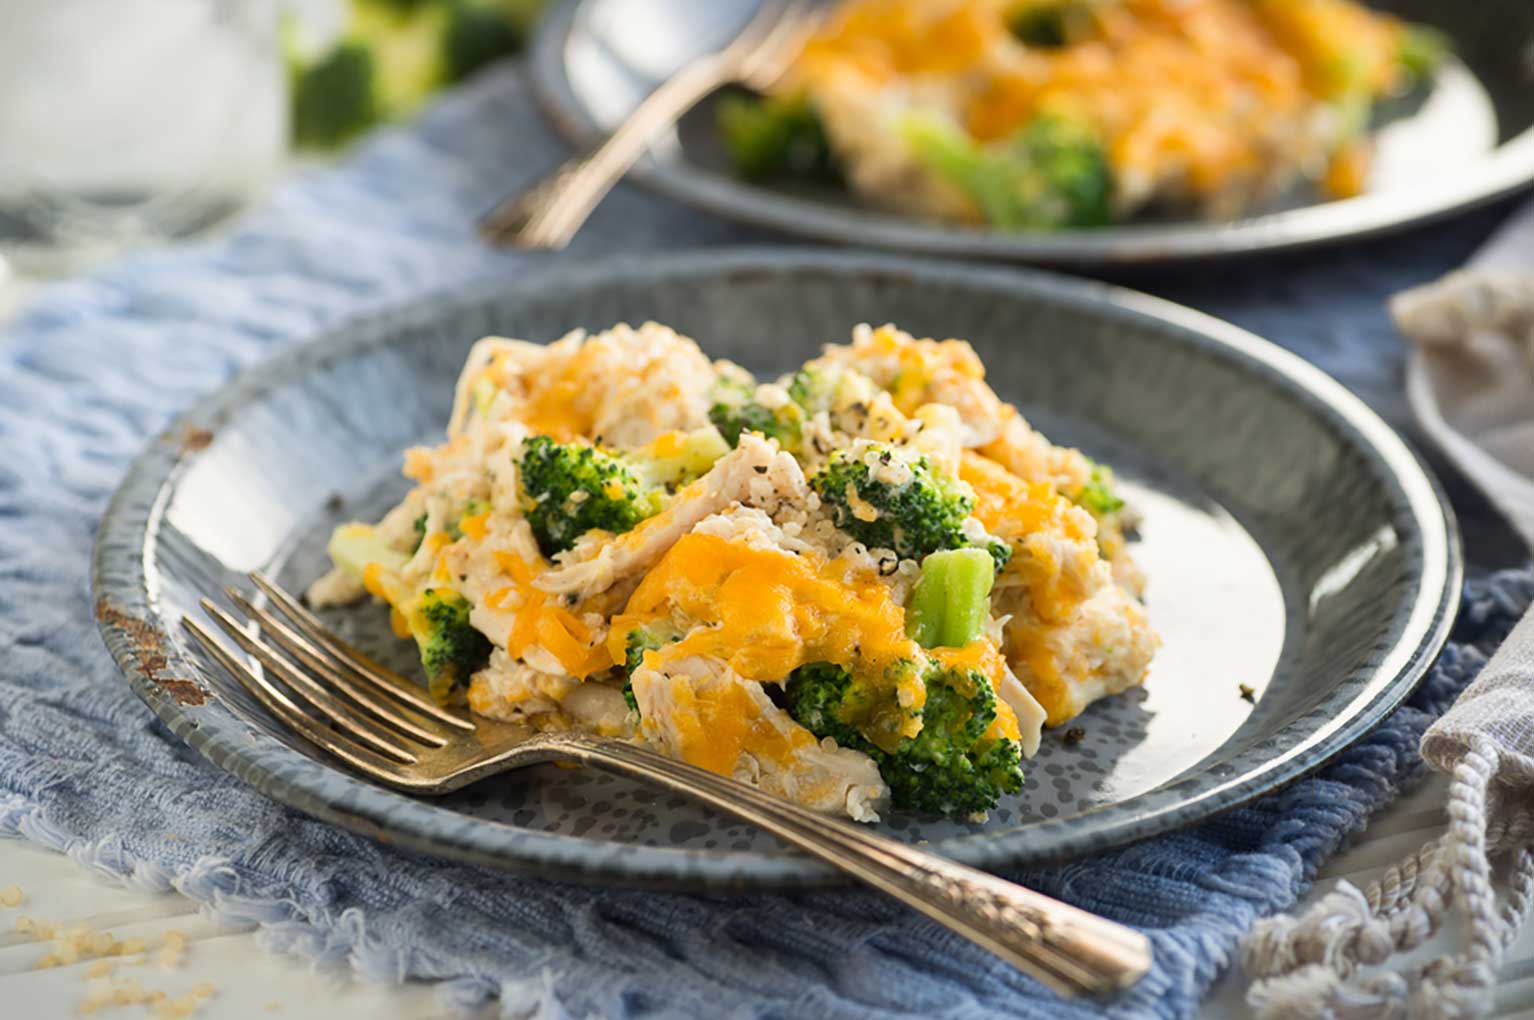 Quinoa casserole with chicken, broccoli, and cheese on a plate with fork